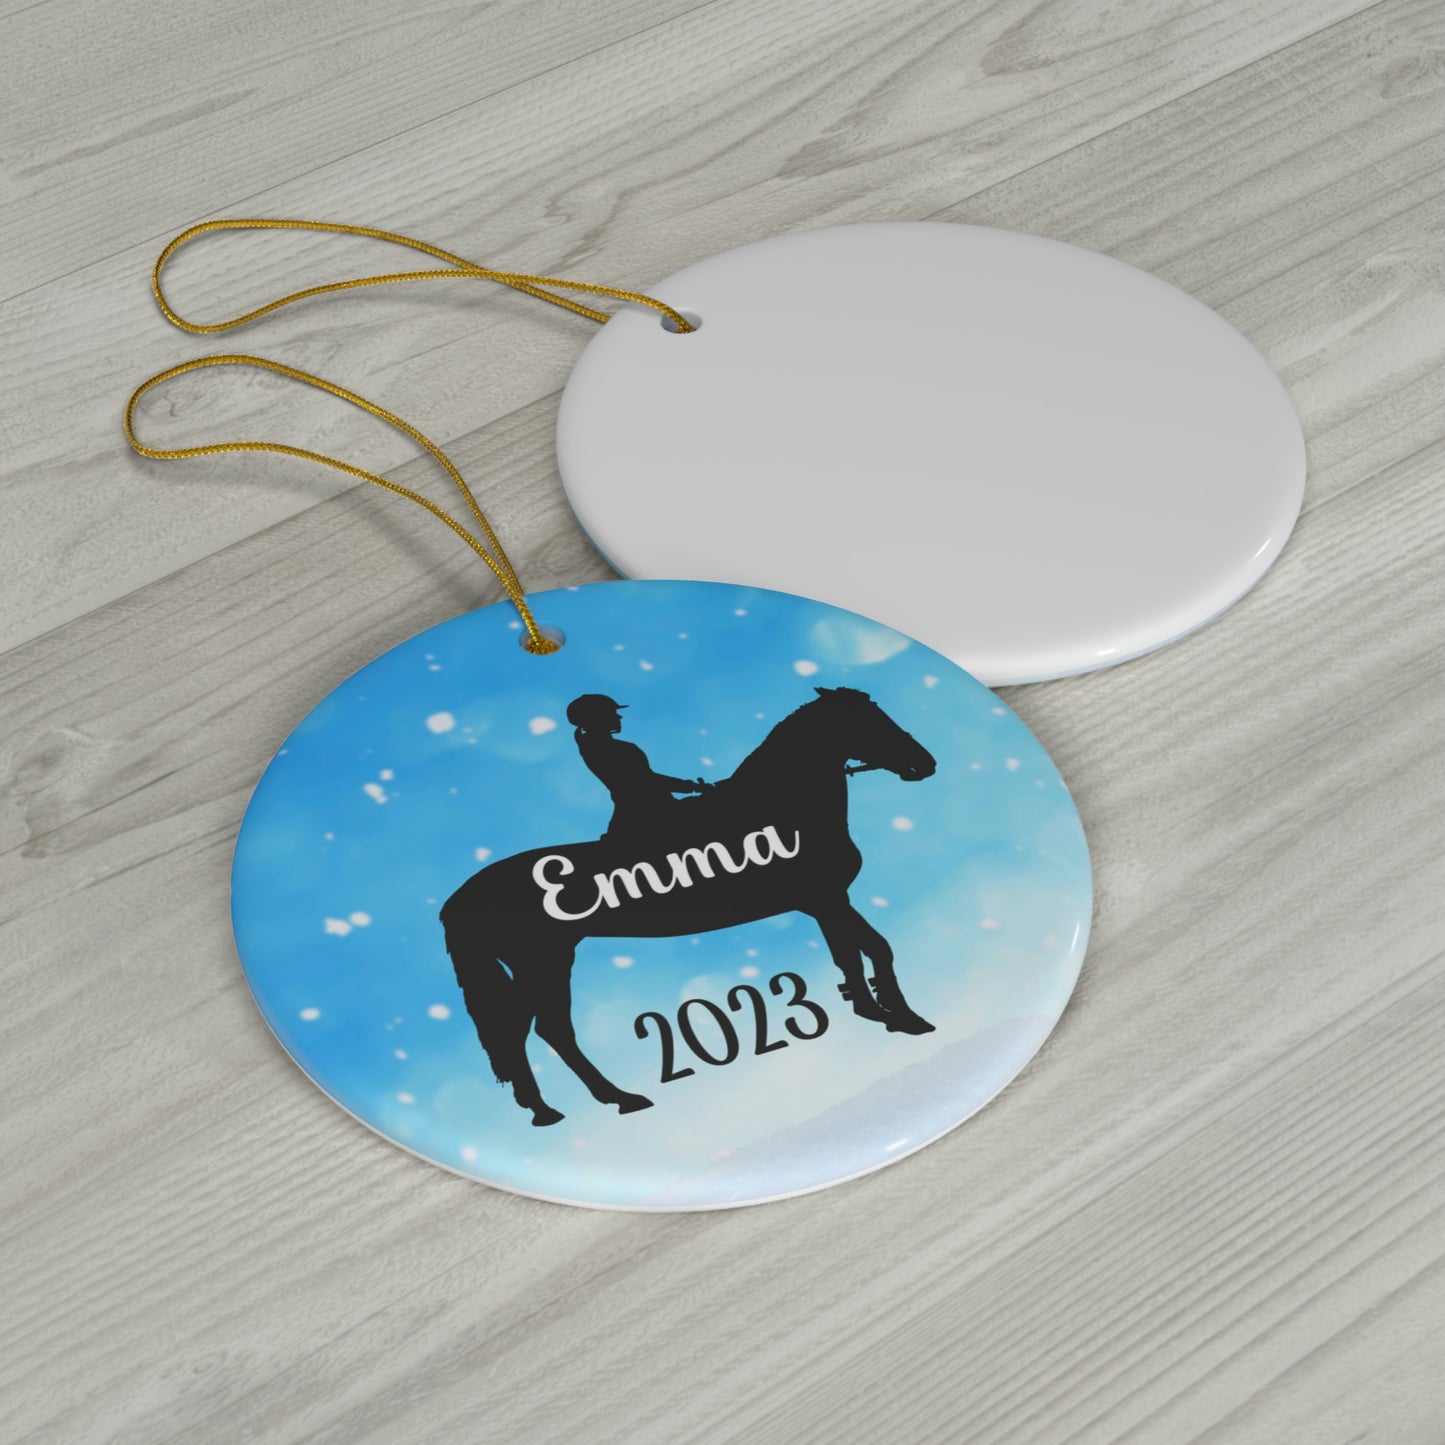 Equestrian Ornament, Personalized Christmas Ceramic Horseback Riding Christmas Tree Ornament, Gifts for Horse Lovers